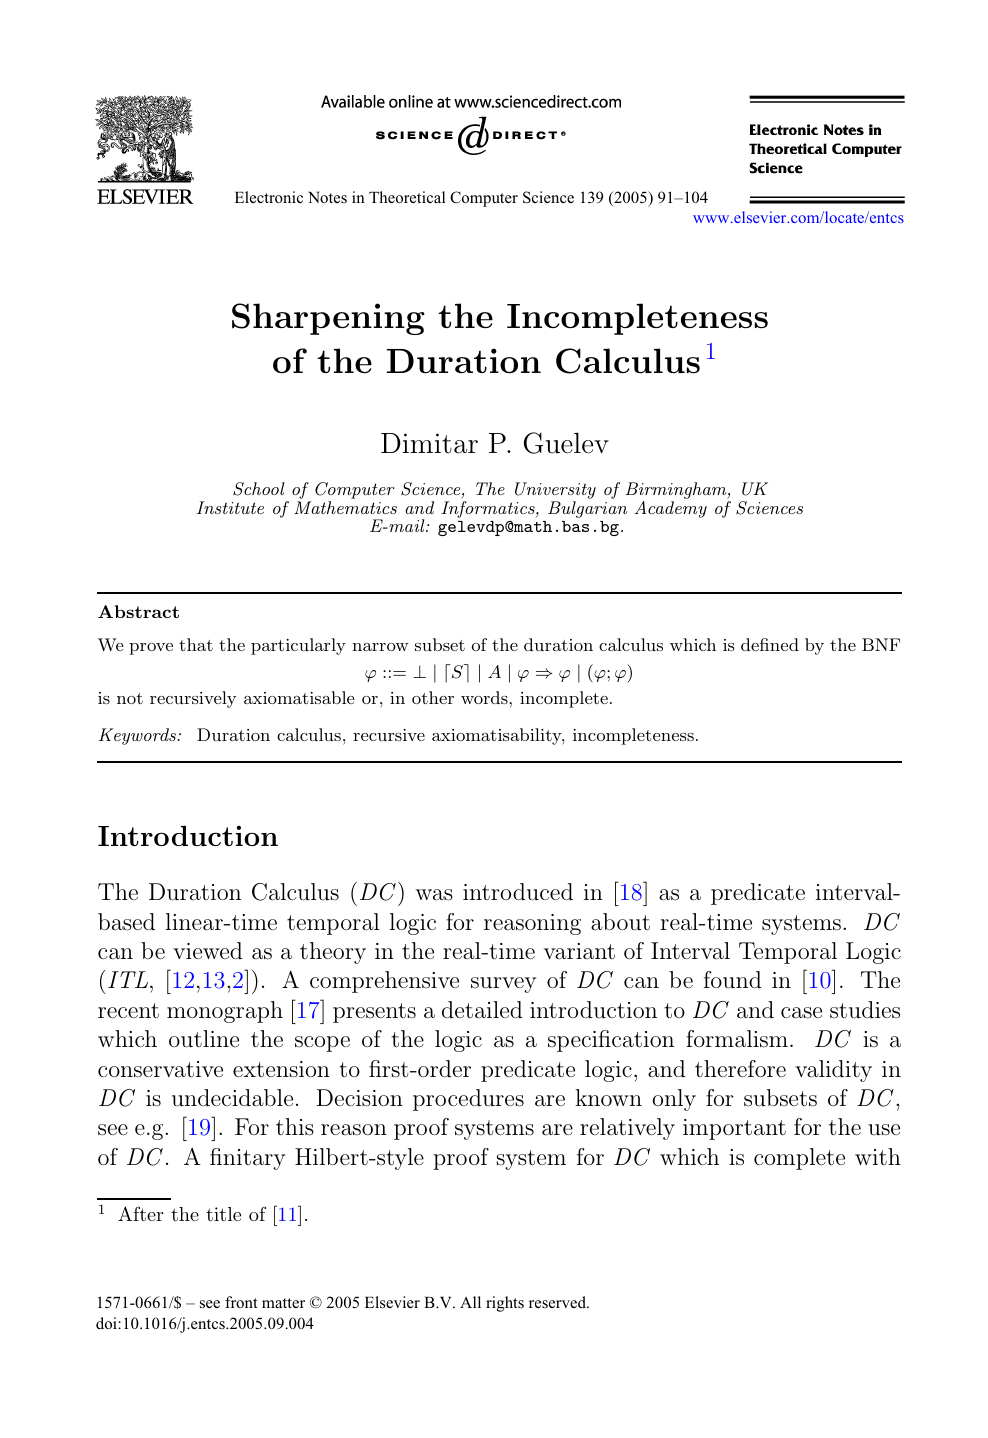 Sharpening The Incompleteness Of The Duration Calculus Topic Of Research Paper In Computer And Information Sciences Download Scholarly Article Pdf And Read For Free On Cyberleninka Open Science Hub